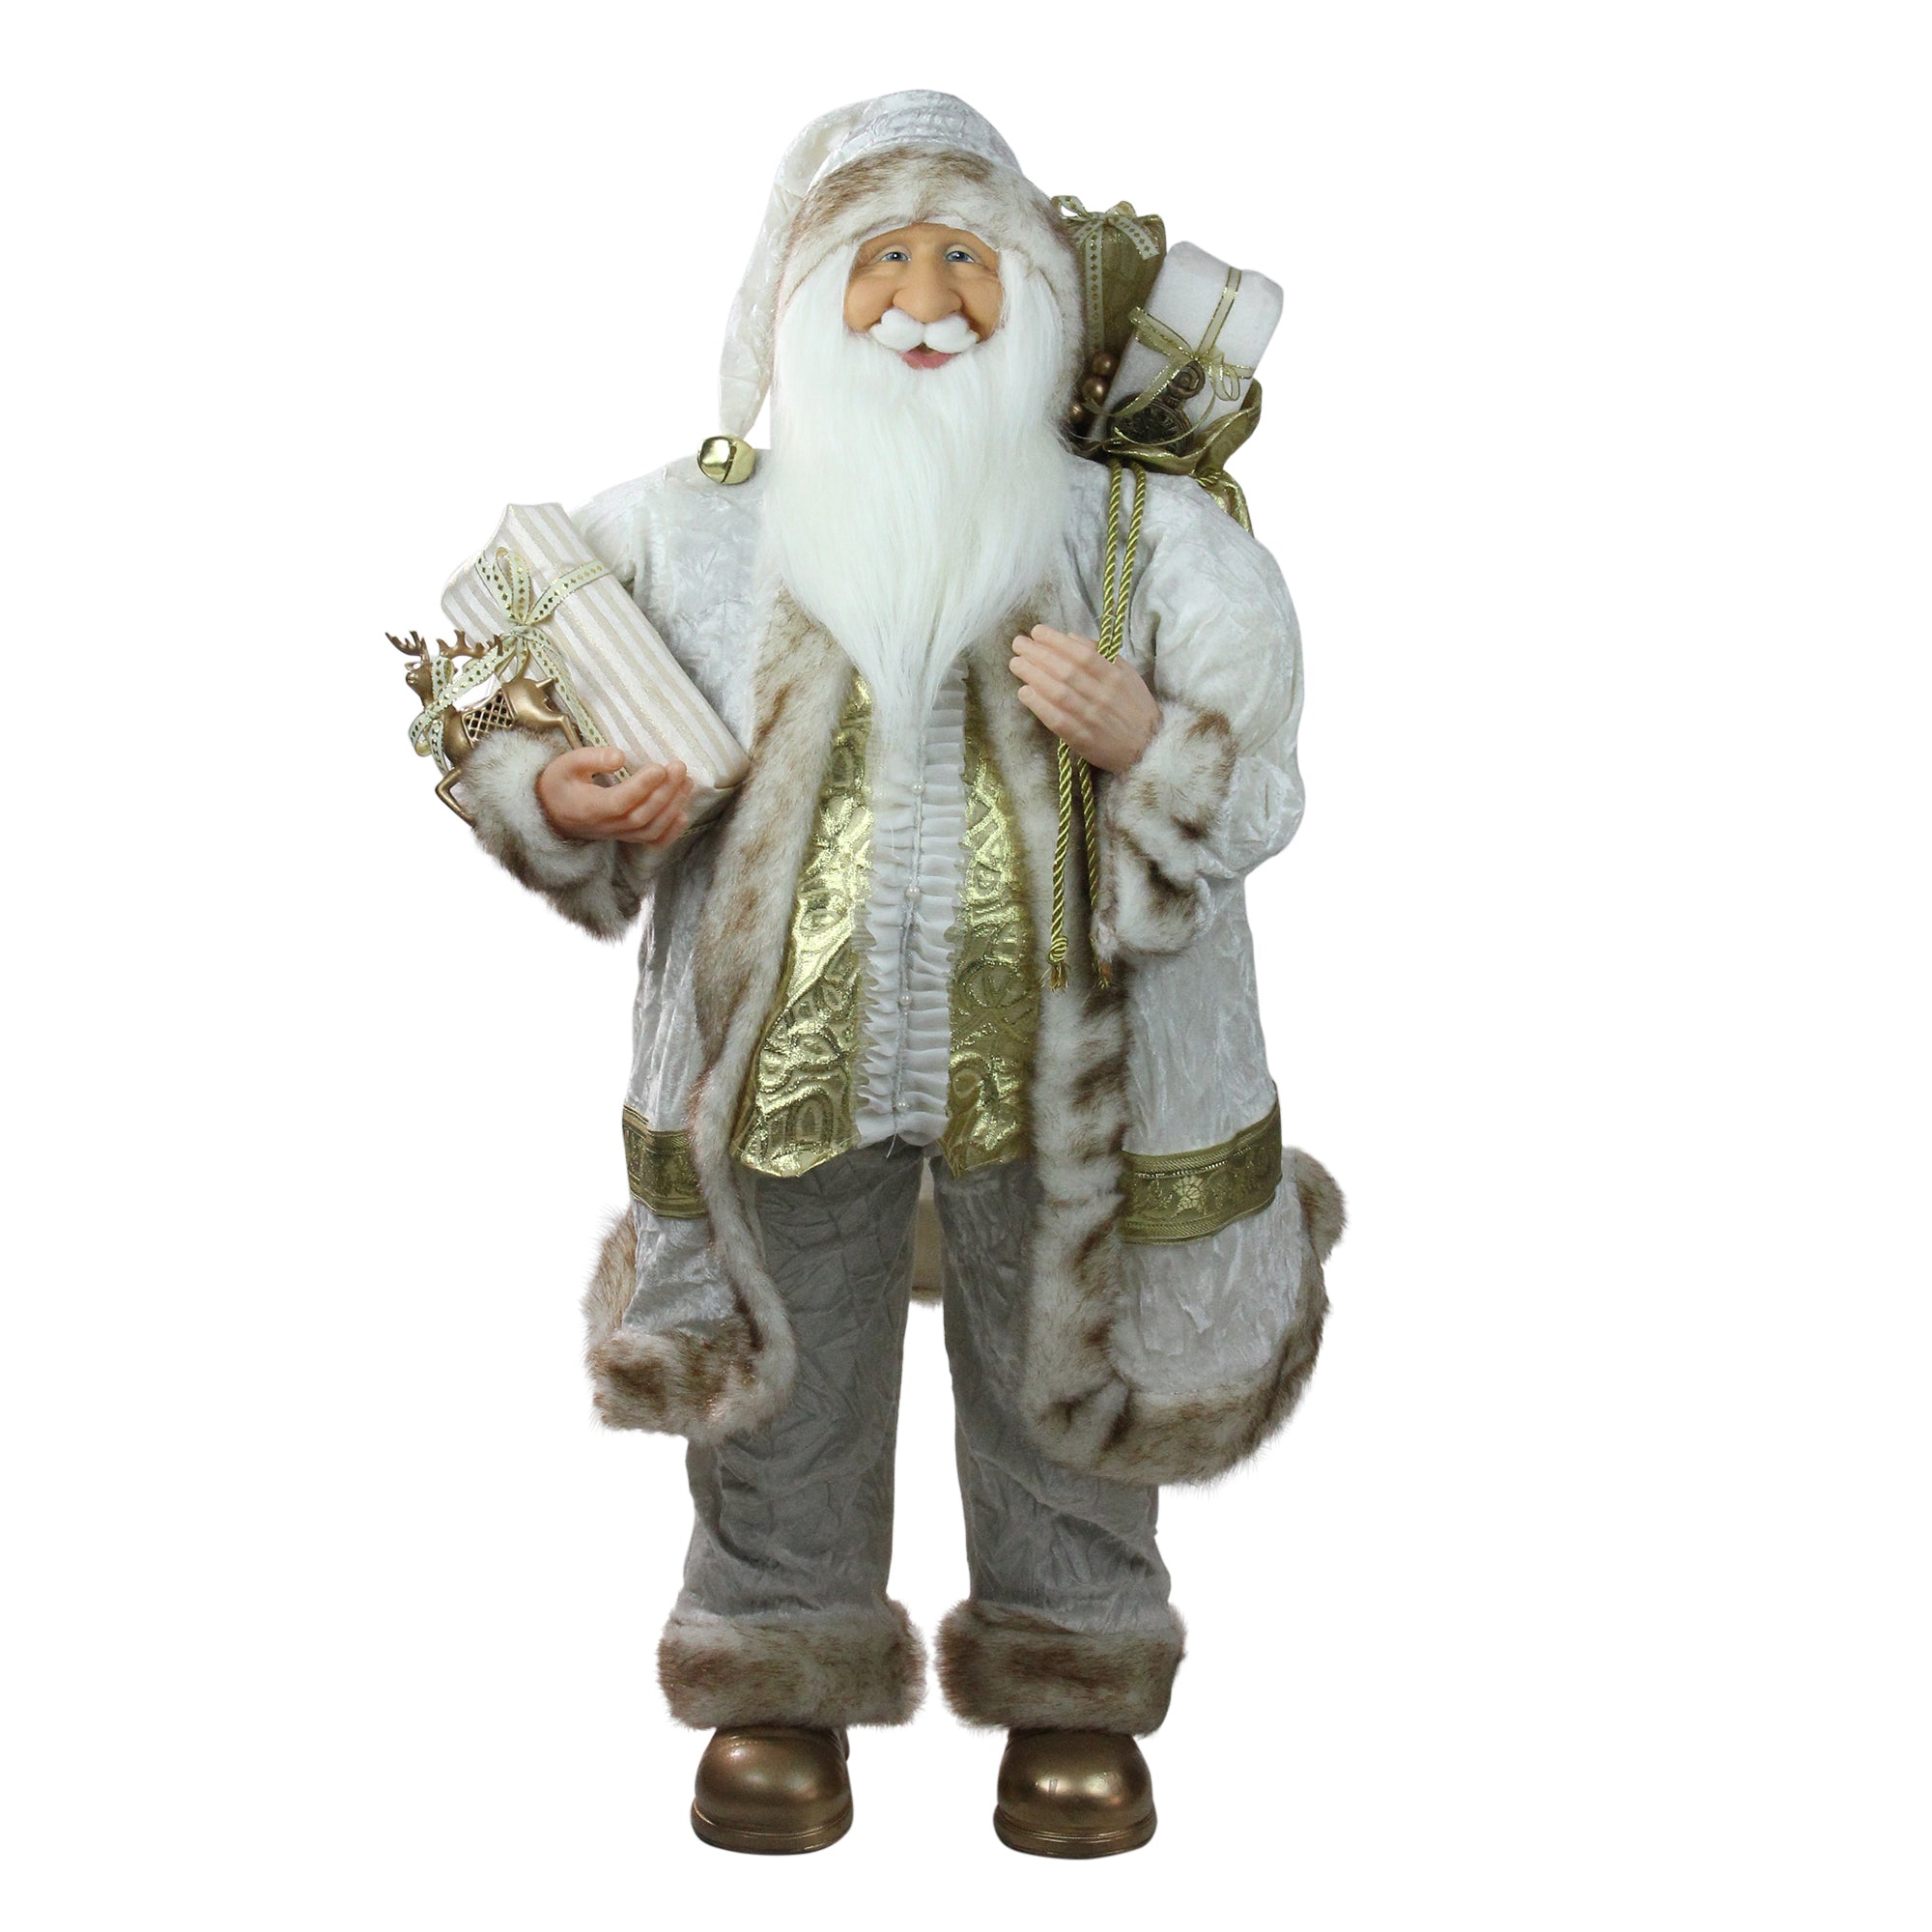 36" Glorious Winter White and Ivory Standing Santa Claus Christmas Figure with Gift Bag